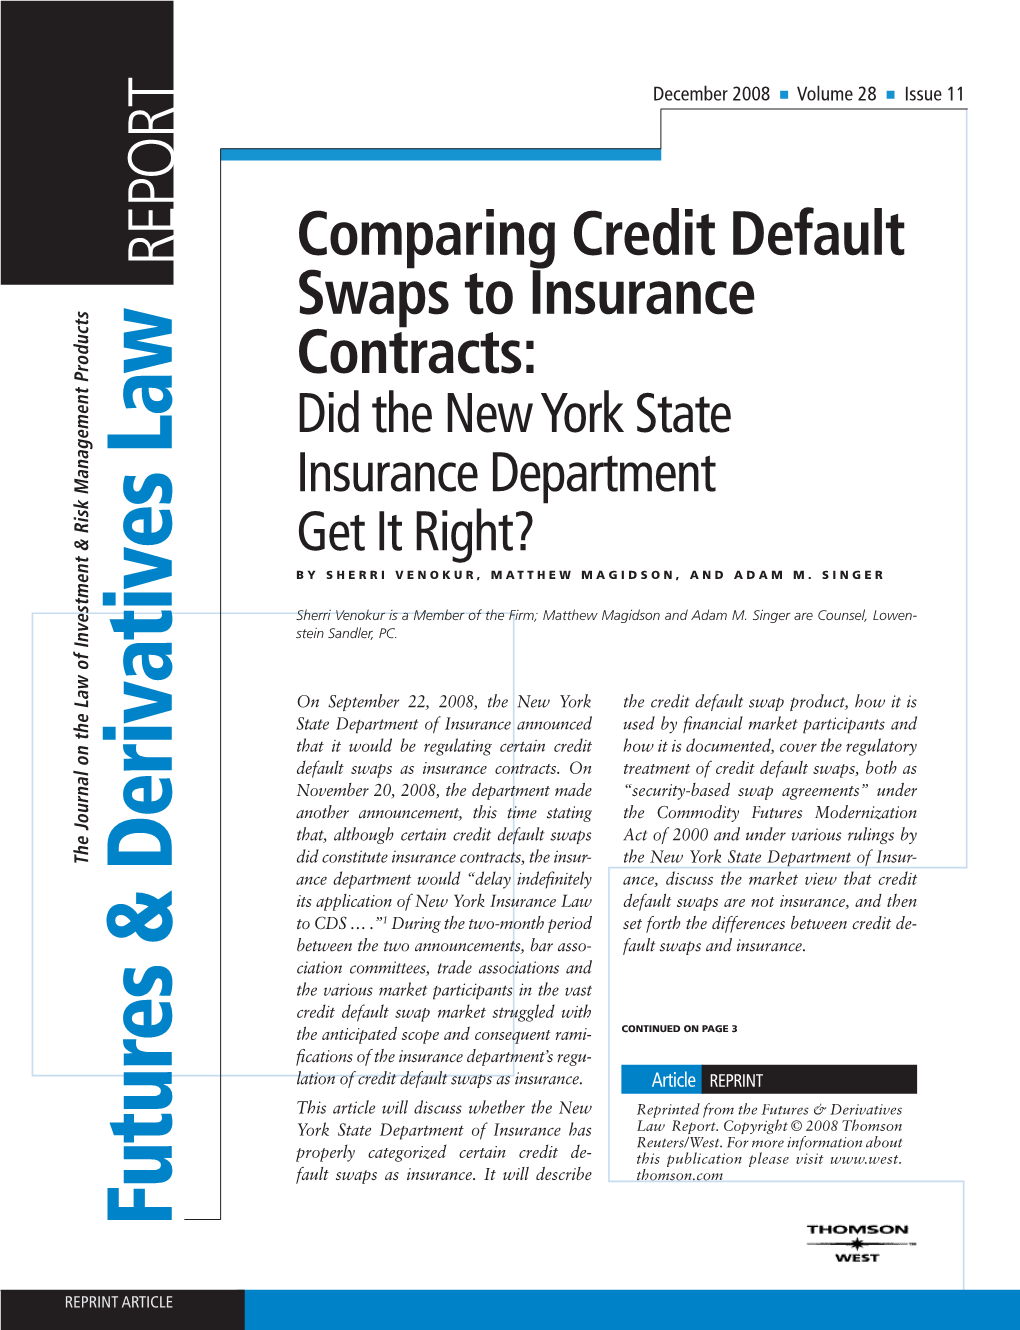 Comparing Credit Default Swaps to Insurance Contracts